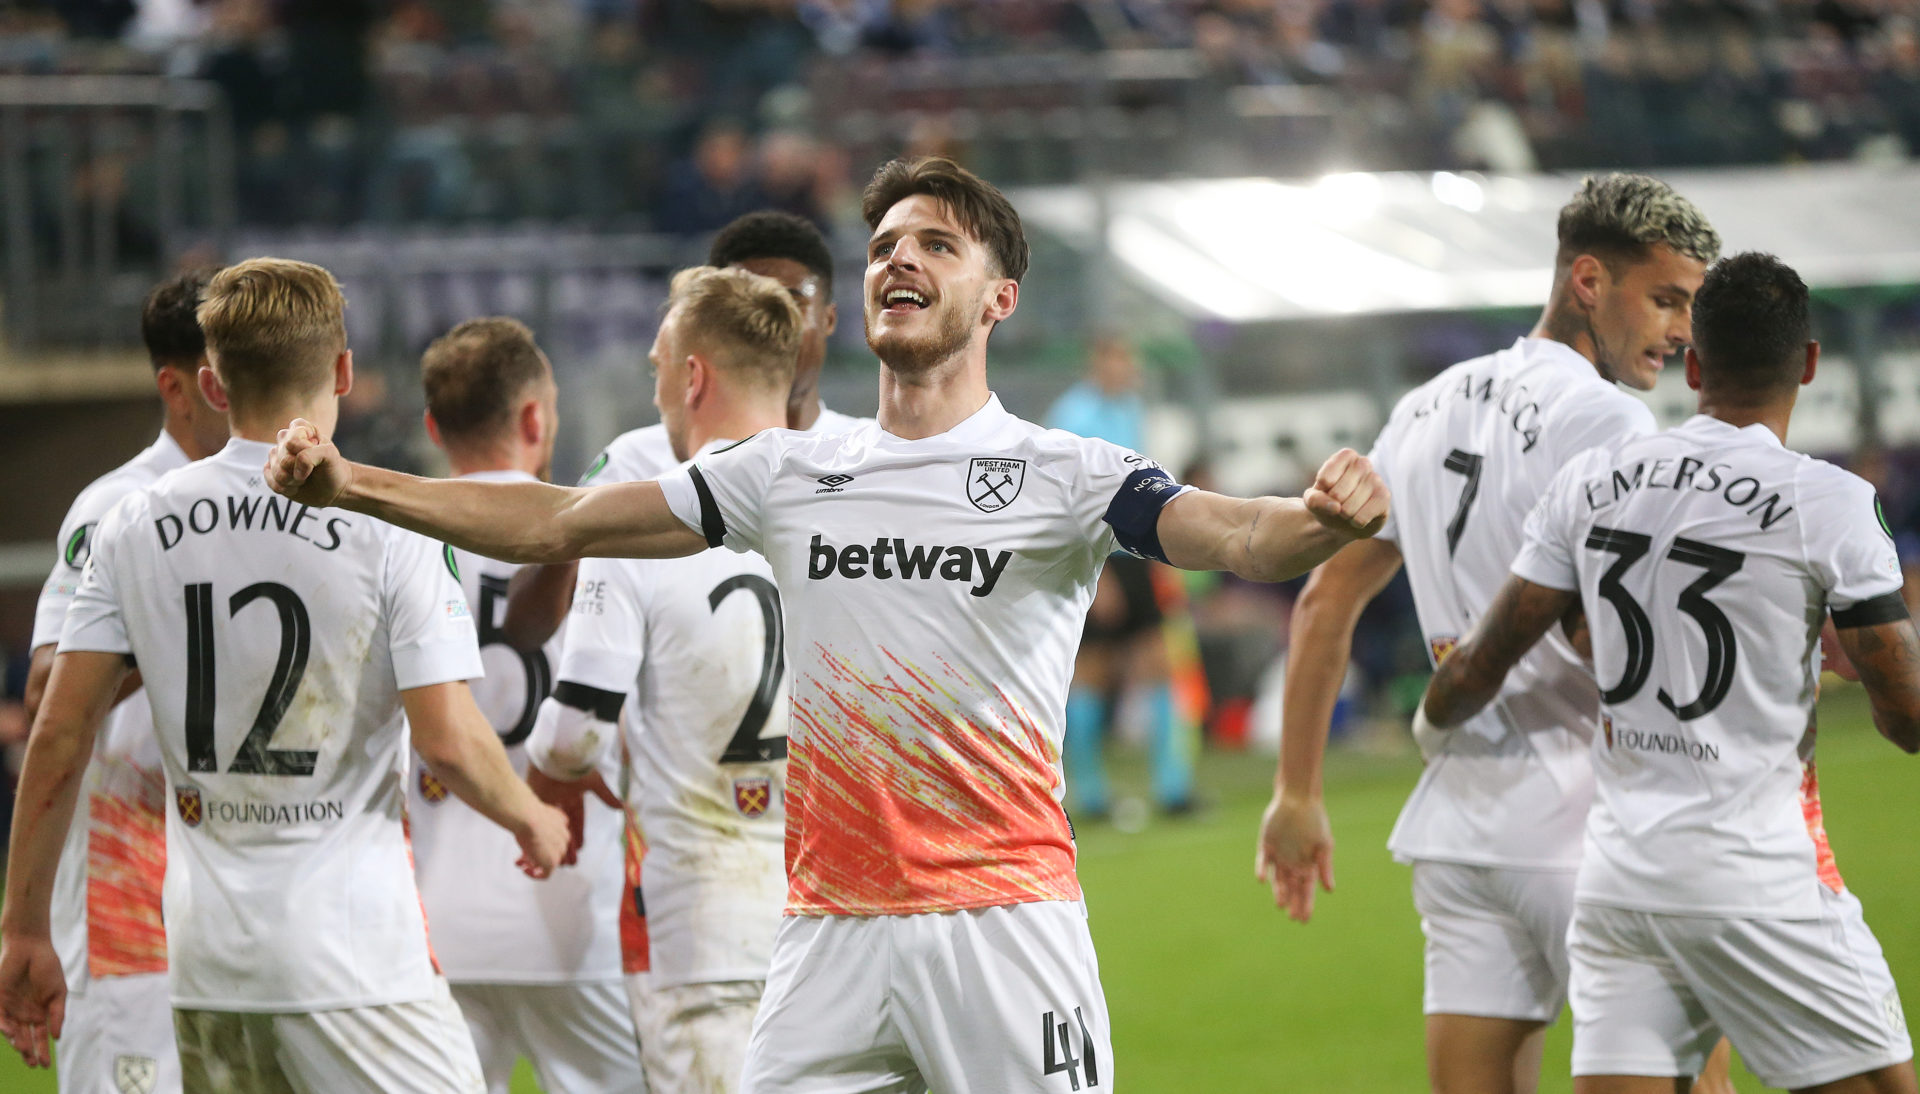 RSC Anderlecht v West Ham United - All You Need To Know